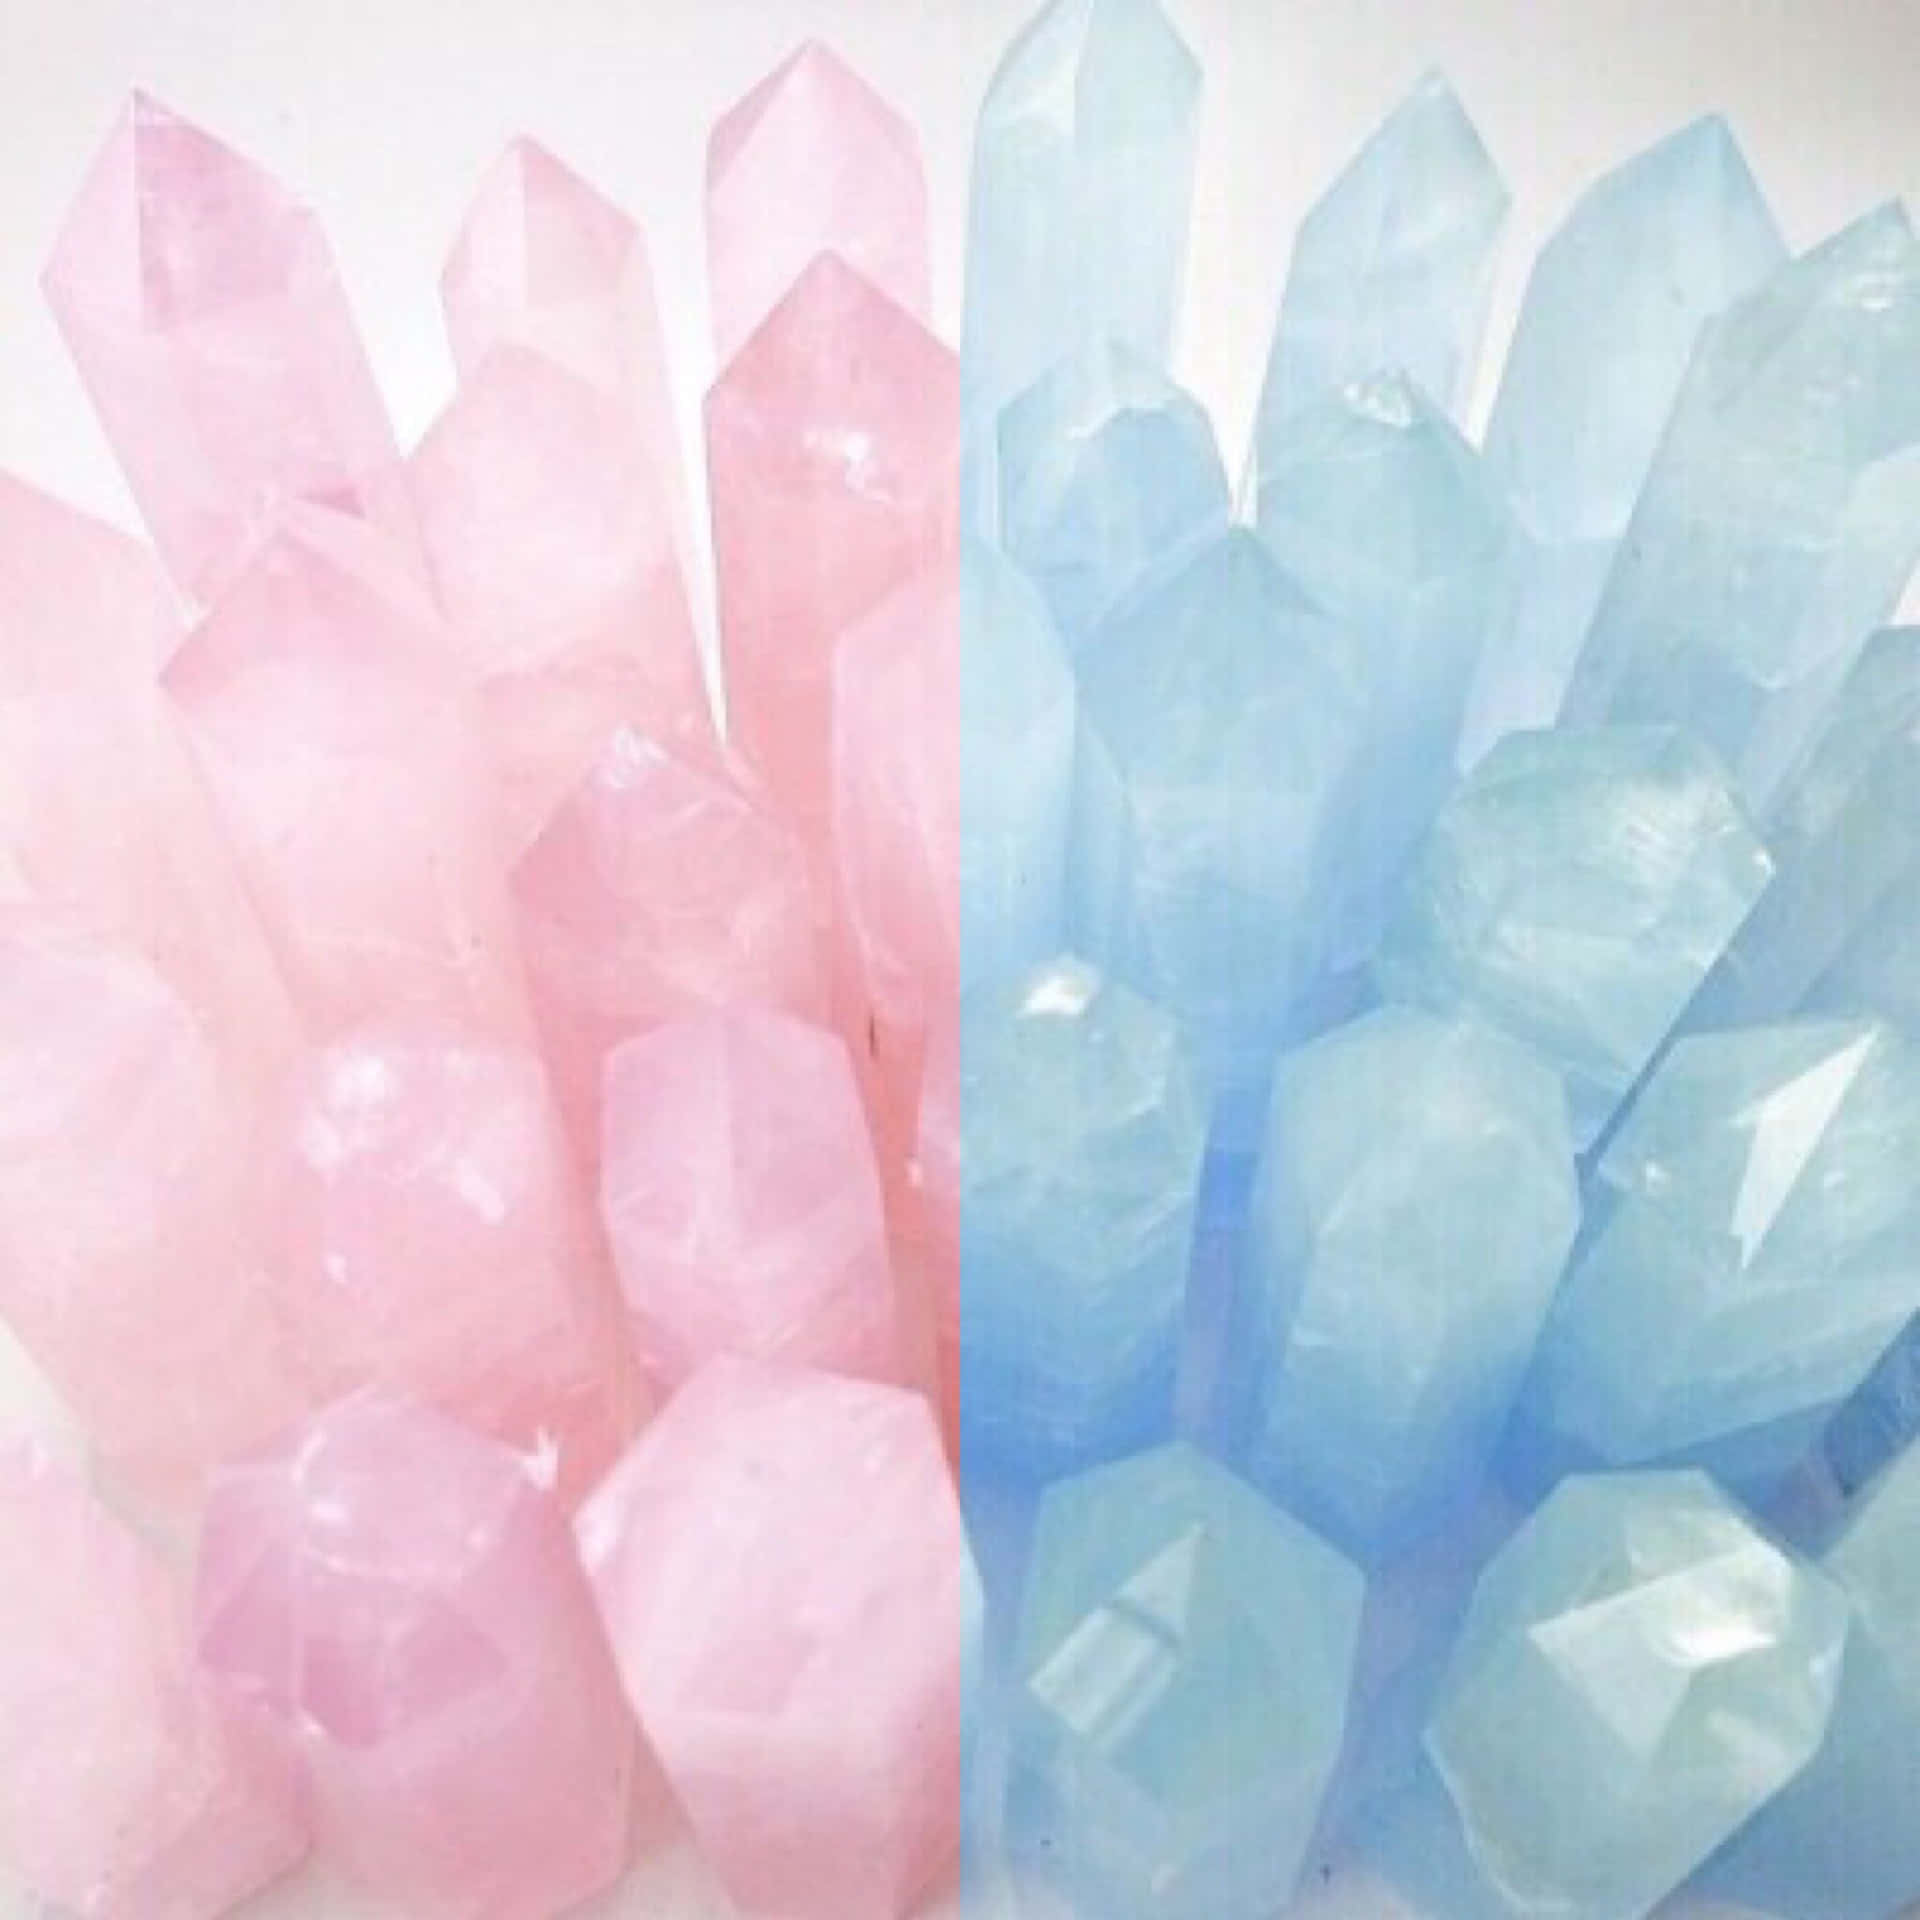 Aesthetic Pastel Pink And Blue Crystal Wallpaper